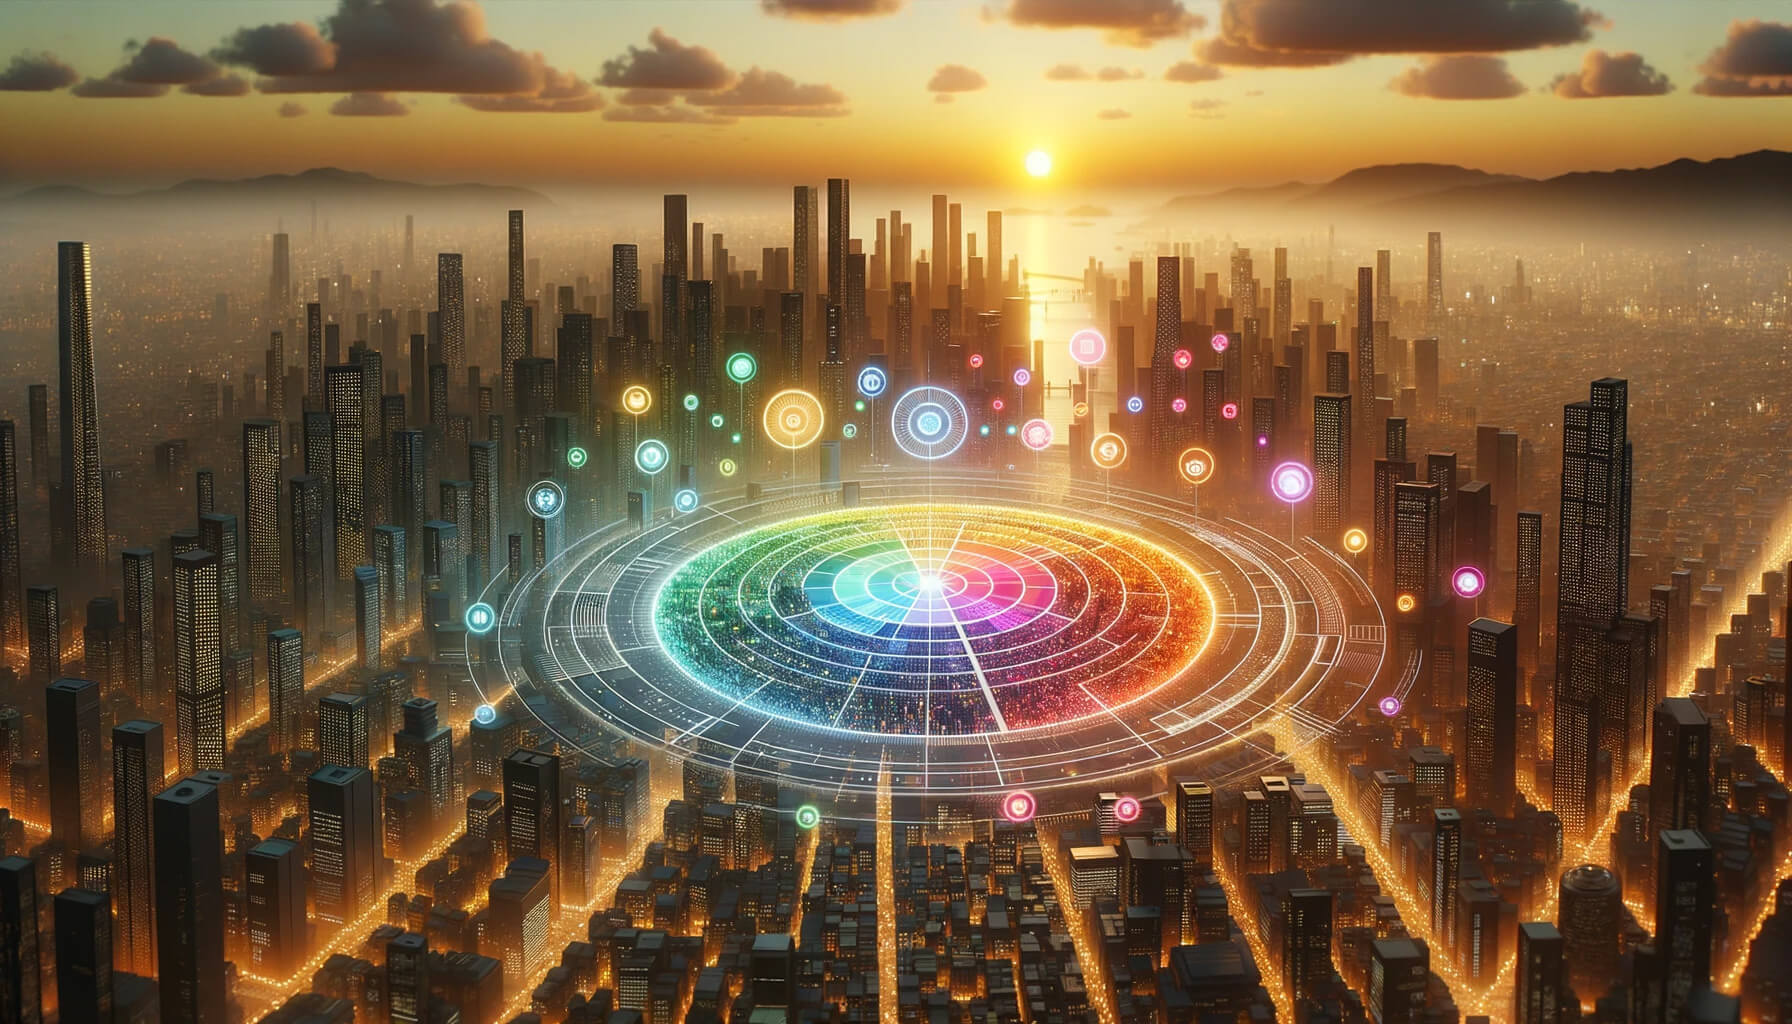 A breathtaking view of a futuristic city during twilight, illuminated by neon lights. Multicolored, radiant circles emanate from a central point, intertwining with the city's advanced architecture, symbolizing a network of interconnected data and technological optimization.